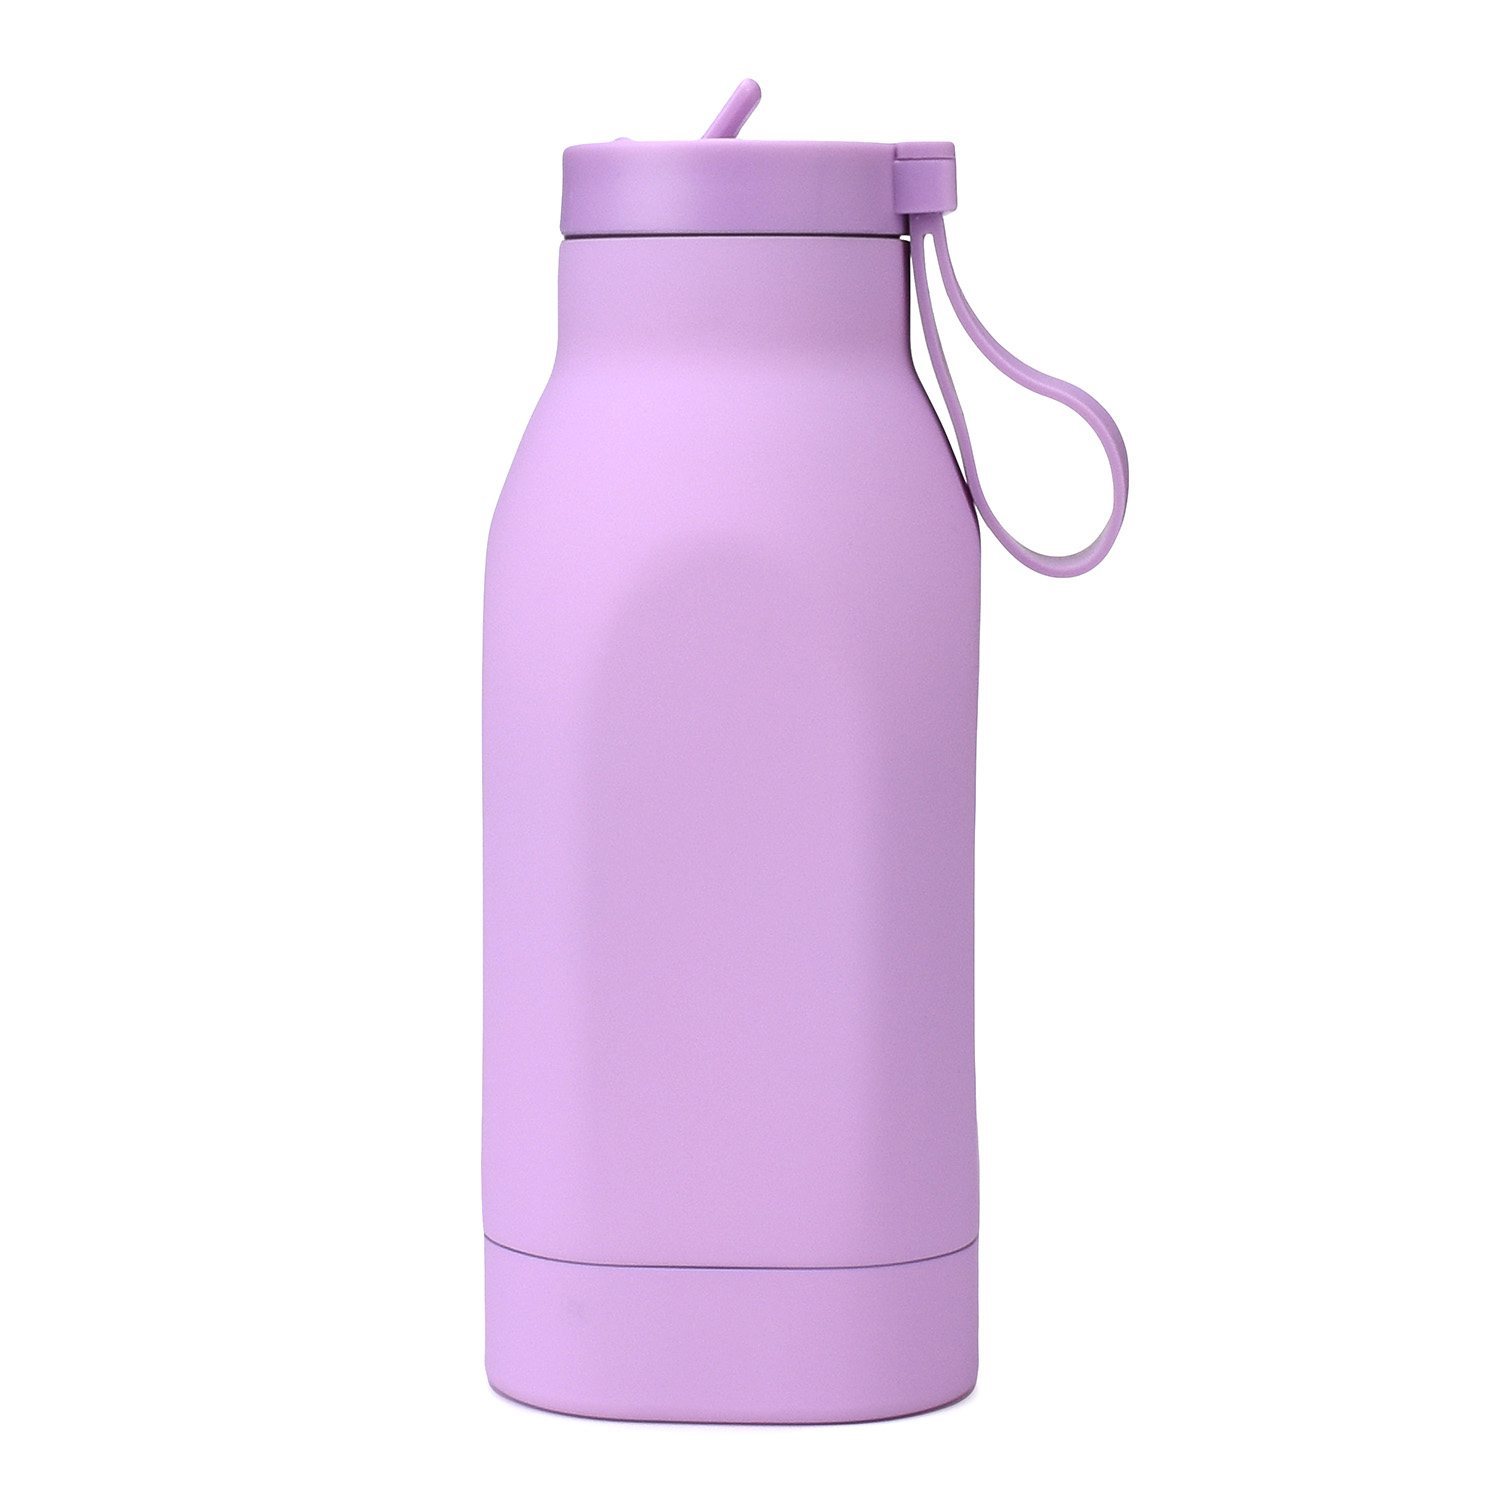 https://www.waterbottle.tech/wp-content/uploads/2019/12/Square-Water-Bottle-Stainless-Steel-350ml-Rubber-Paint-Soft-Surface-S19350G9-6.jpg